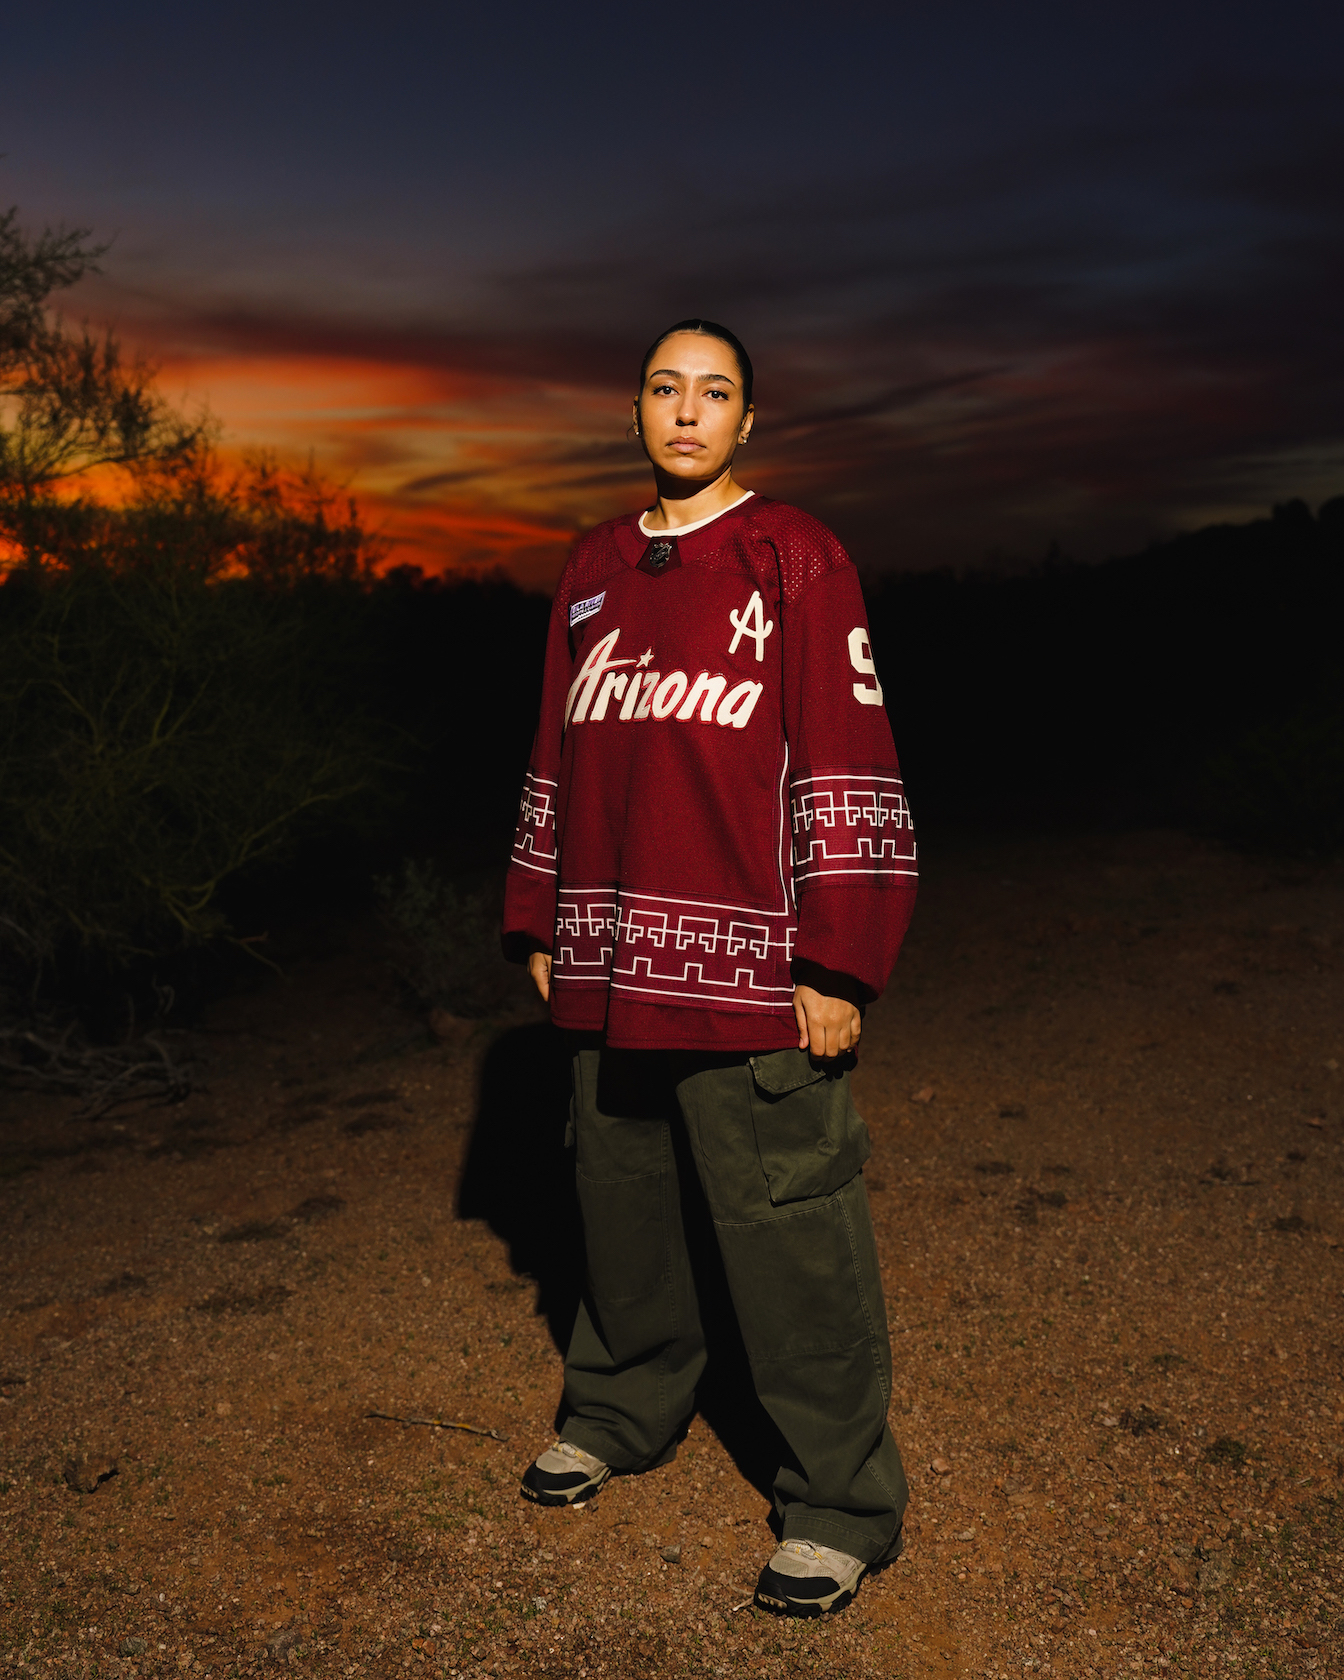 Arizona Coyotes' Desert Collection Designed by Rhuigi Available in